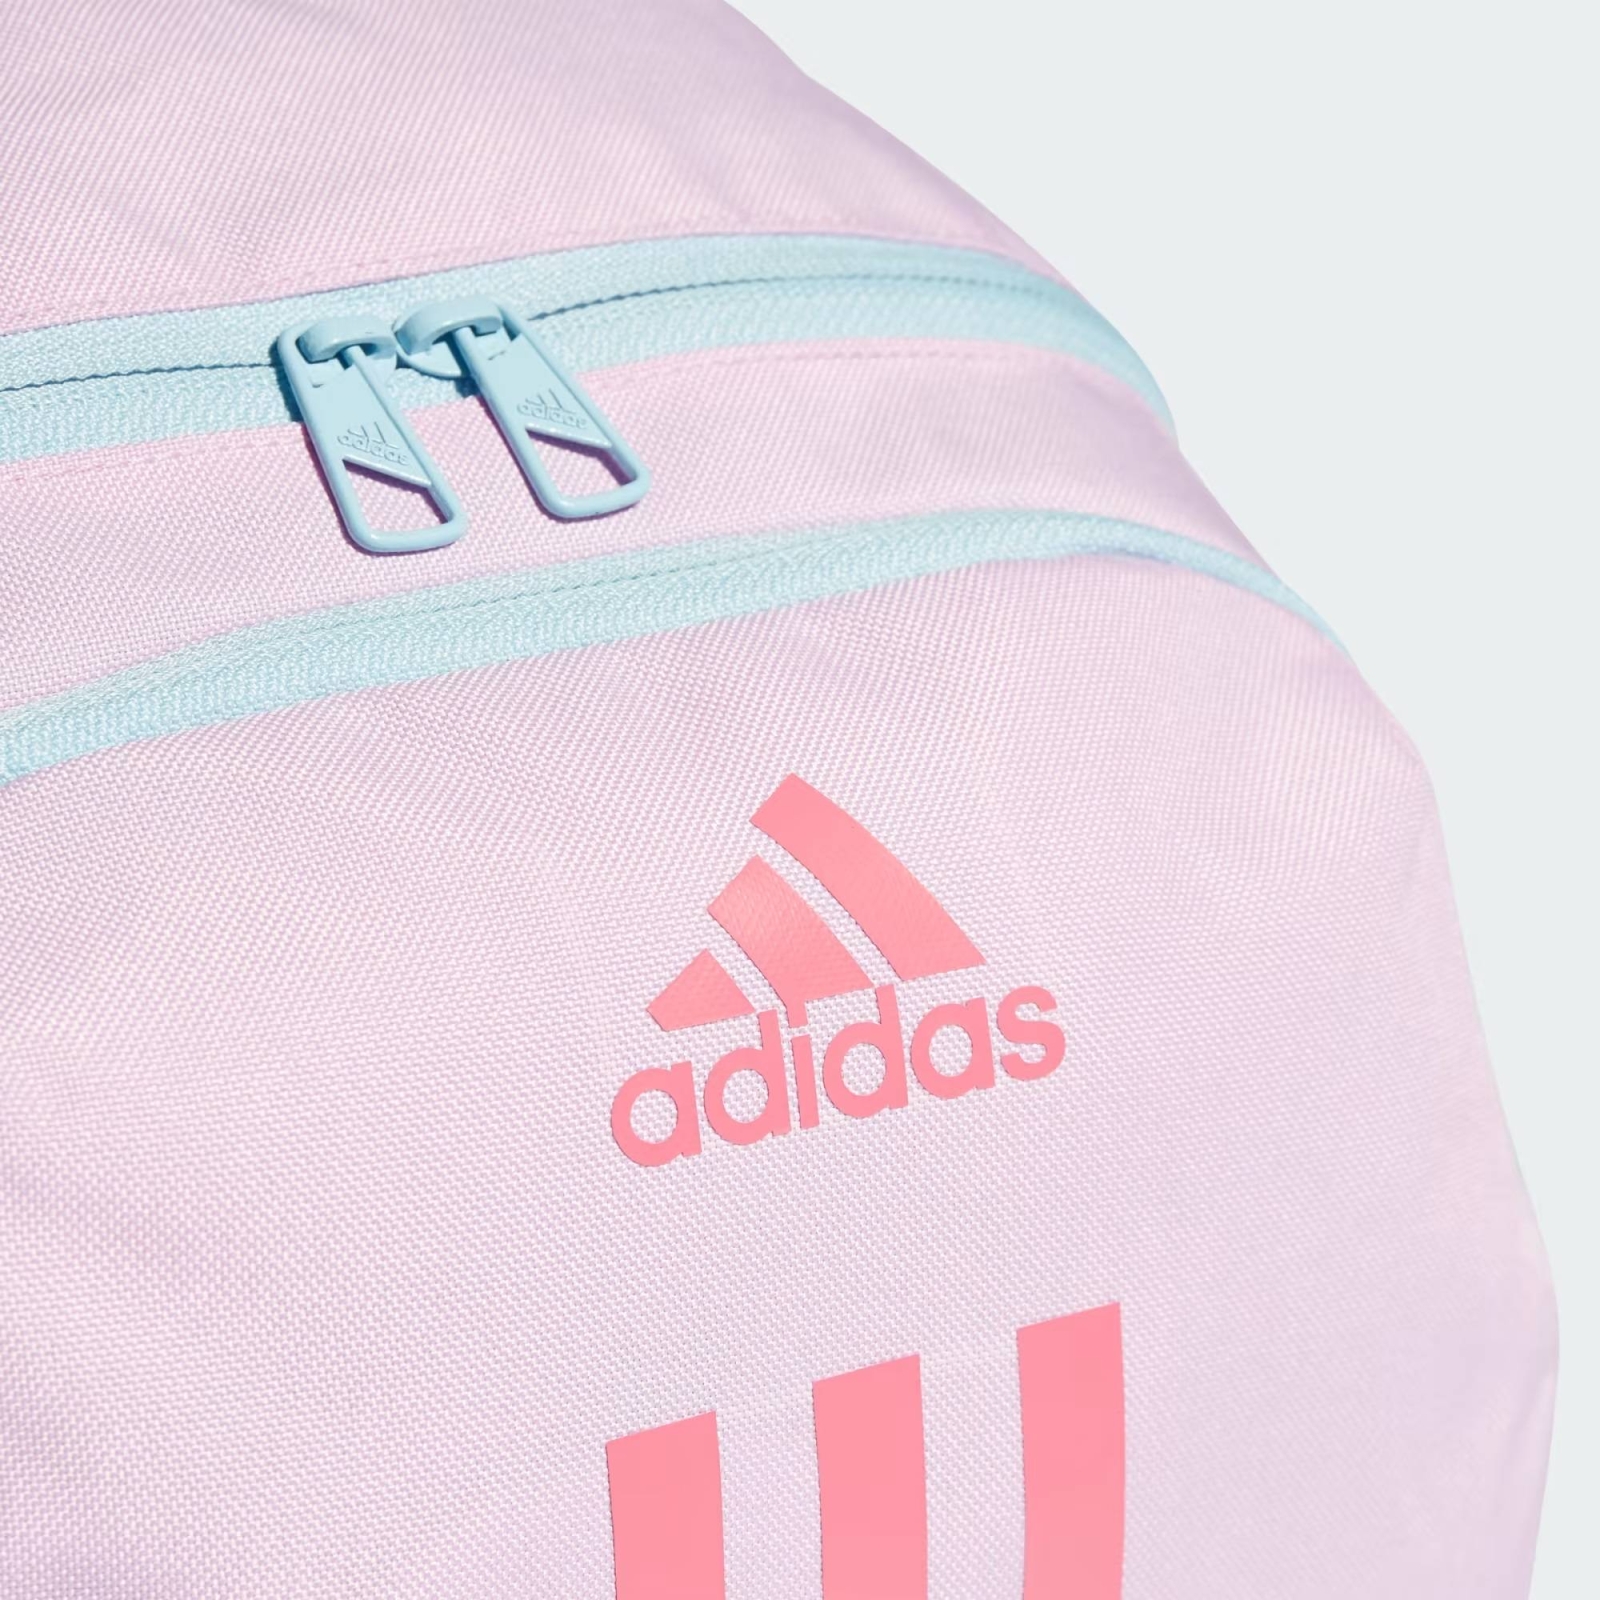 ADIDAS YOUTH POWER BACKPACK